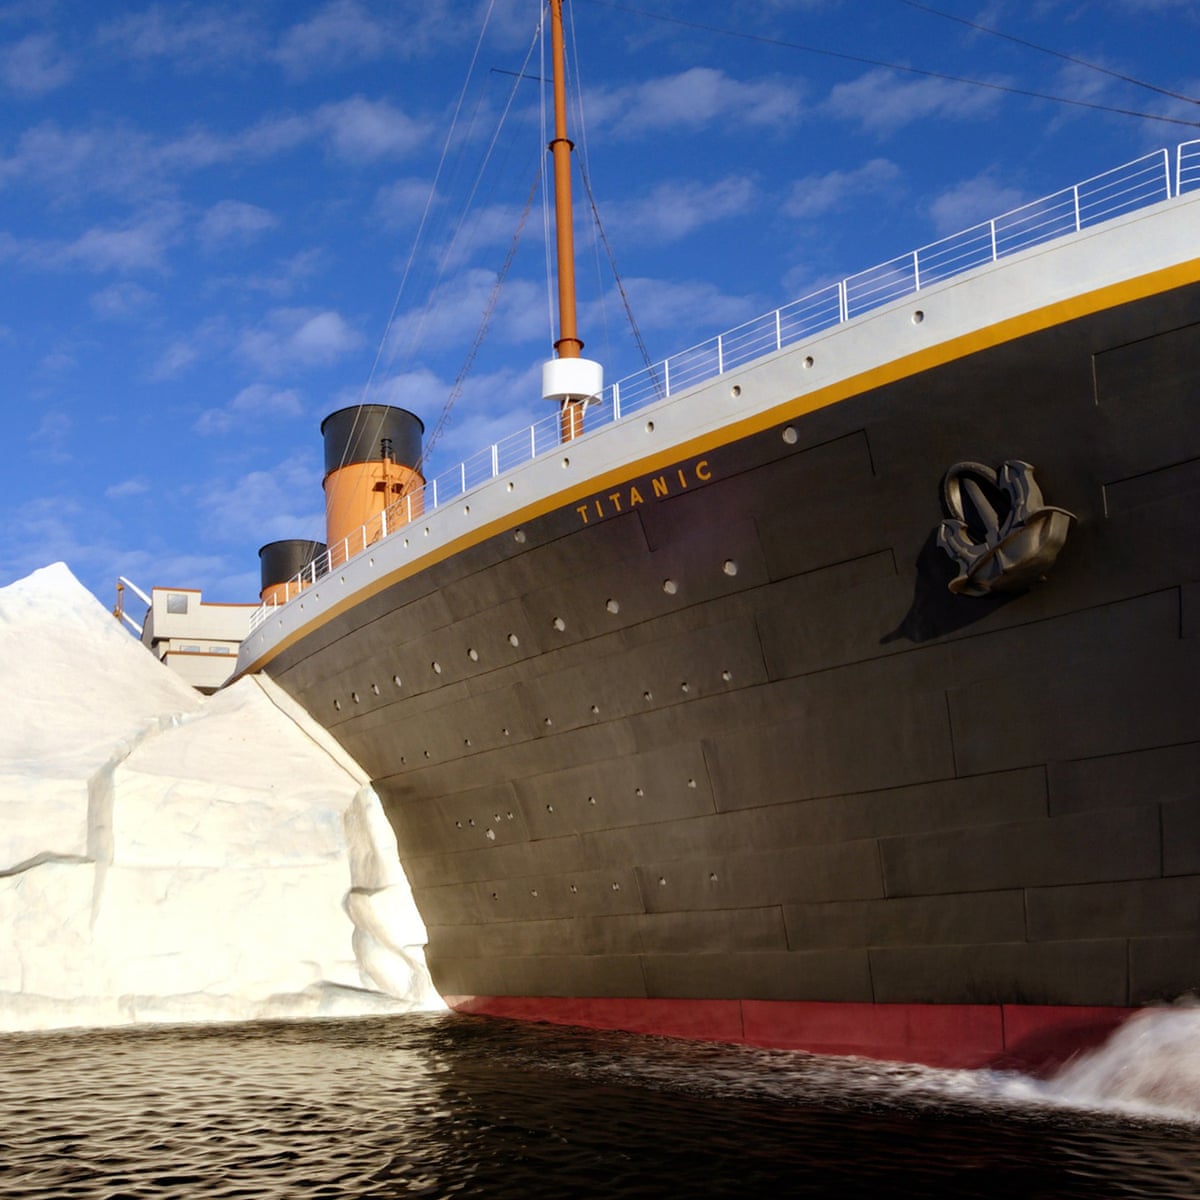 Visitors to US Titanic museum injured by replica iceberg | The Titanic |  The Guardian